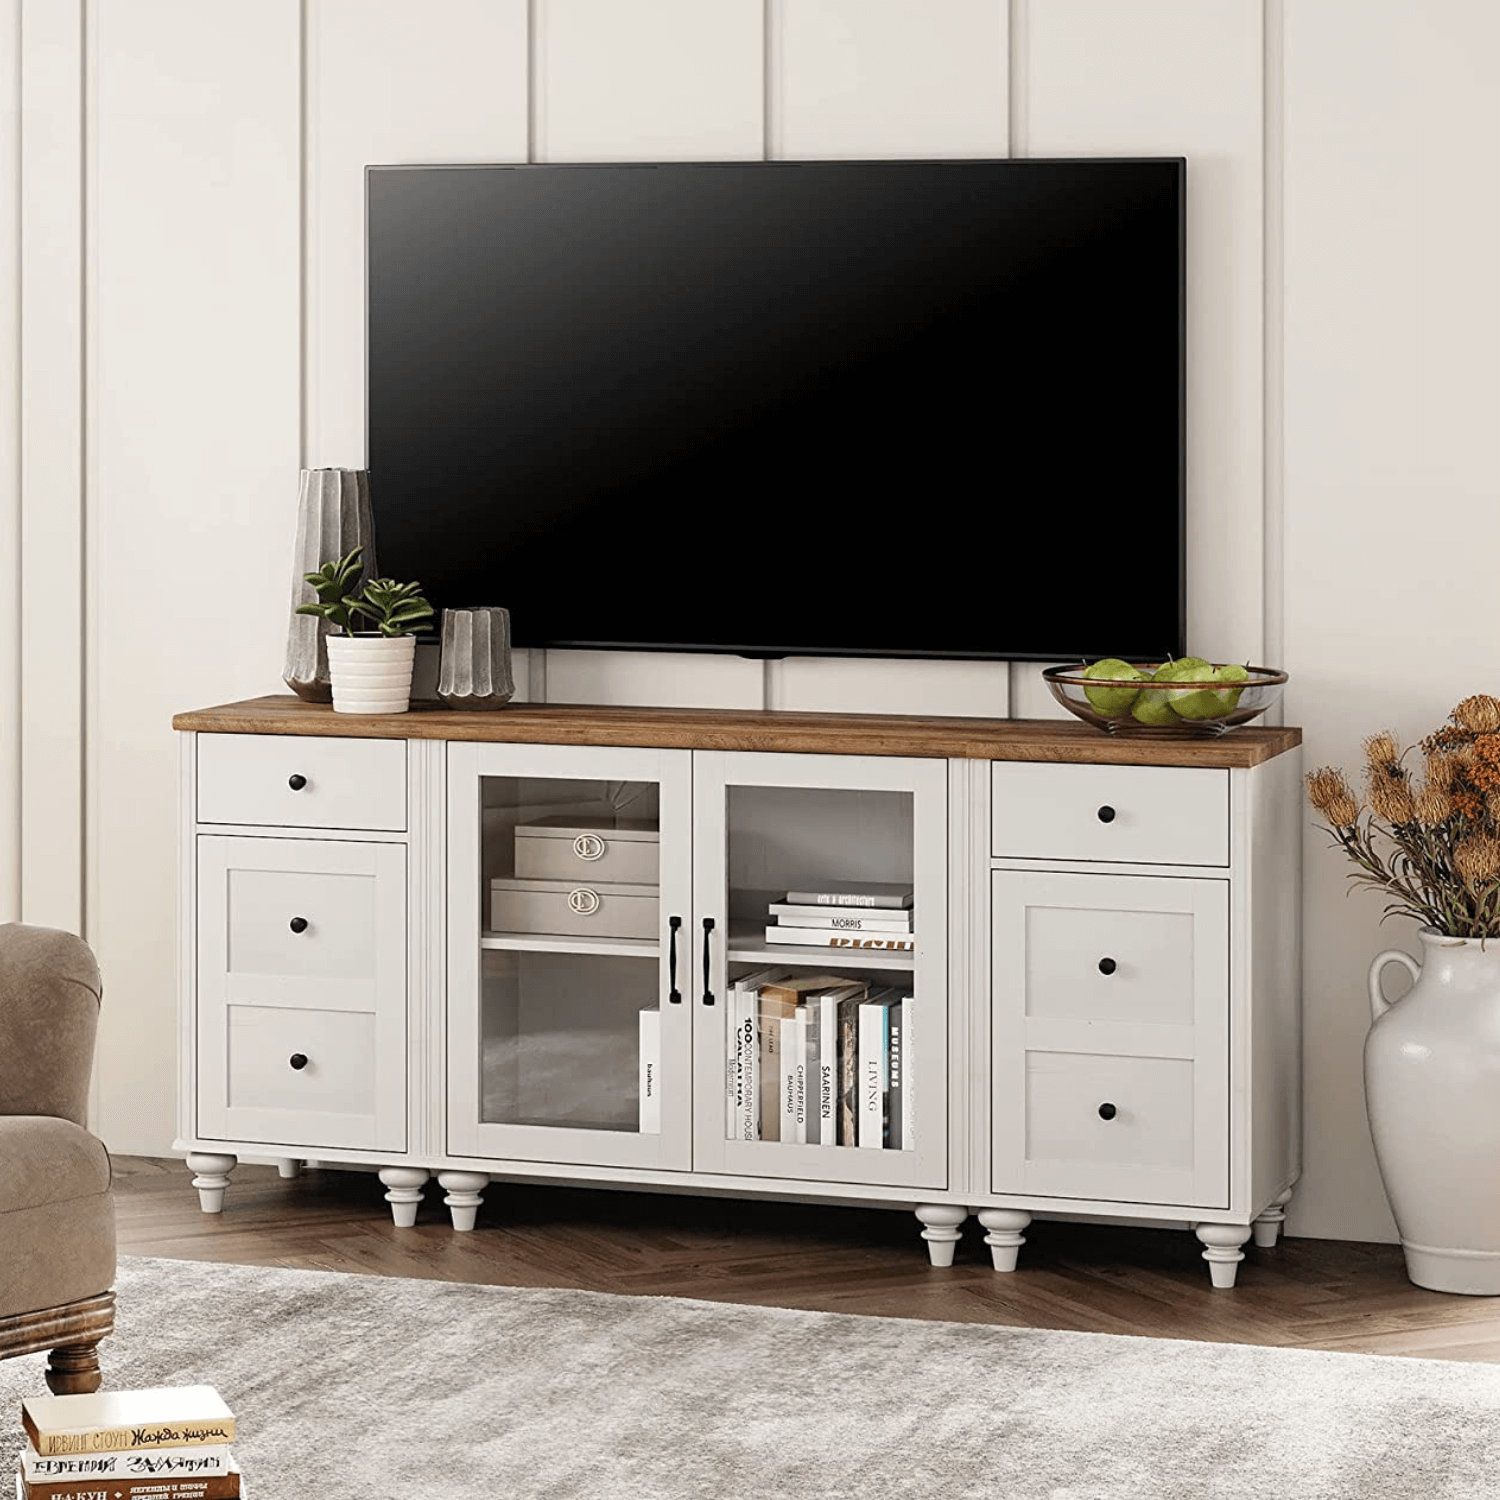 WAMPAT 67" LED TV Stand for 75 Inch TV,  3-in-1 Buffet Cabinet Side Table Set with Charging Station for Dining Room, Off White